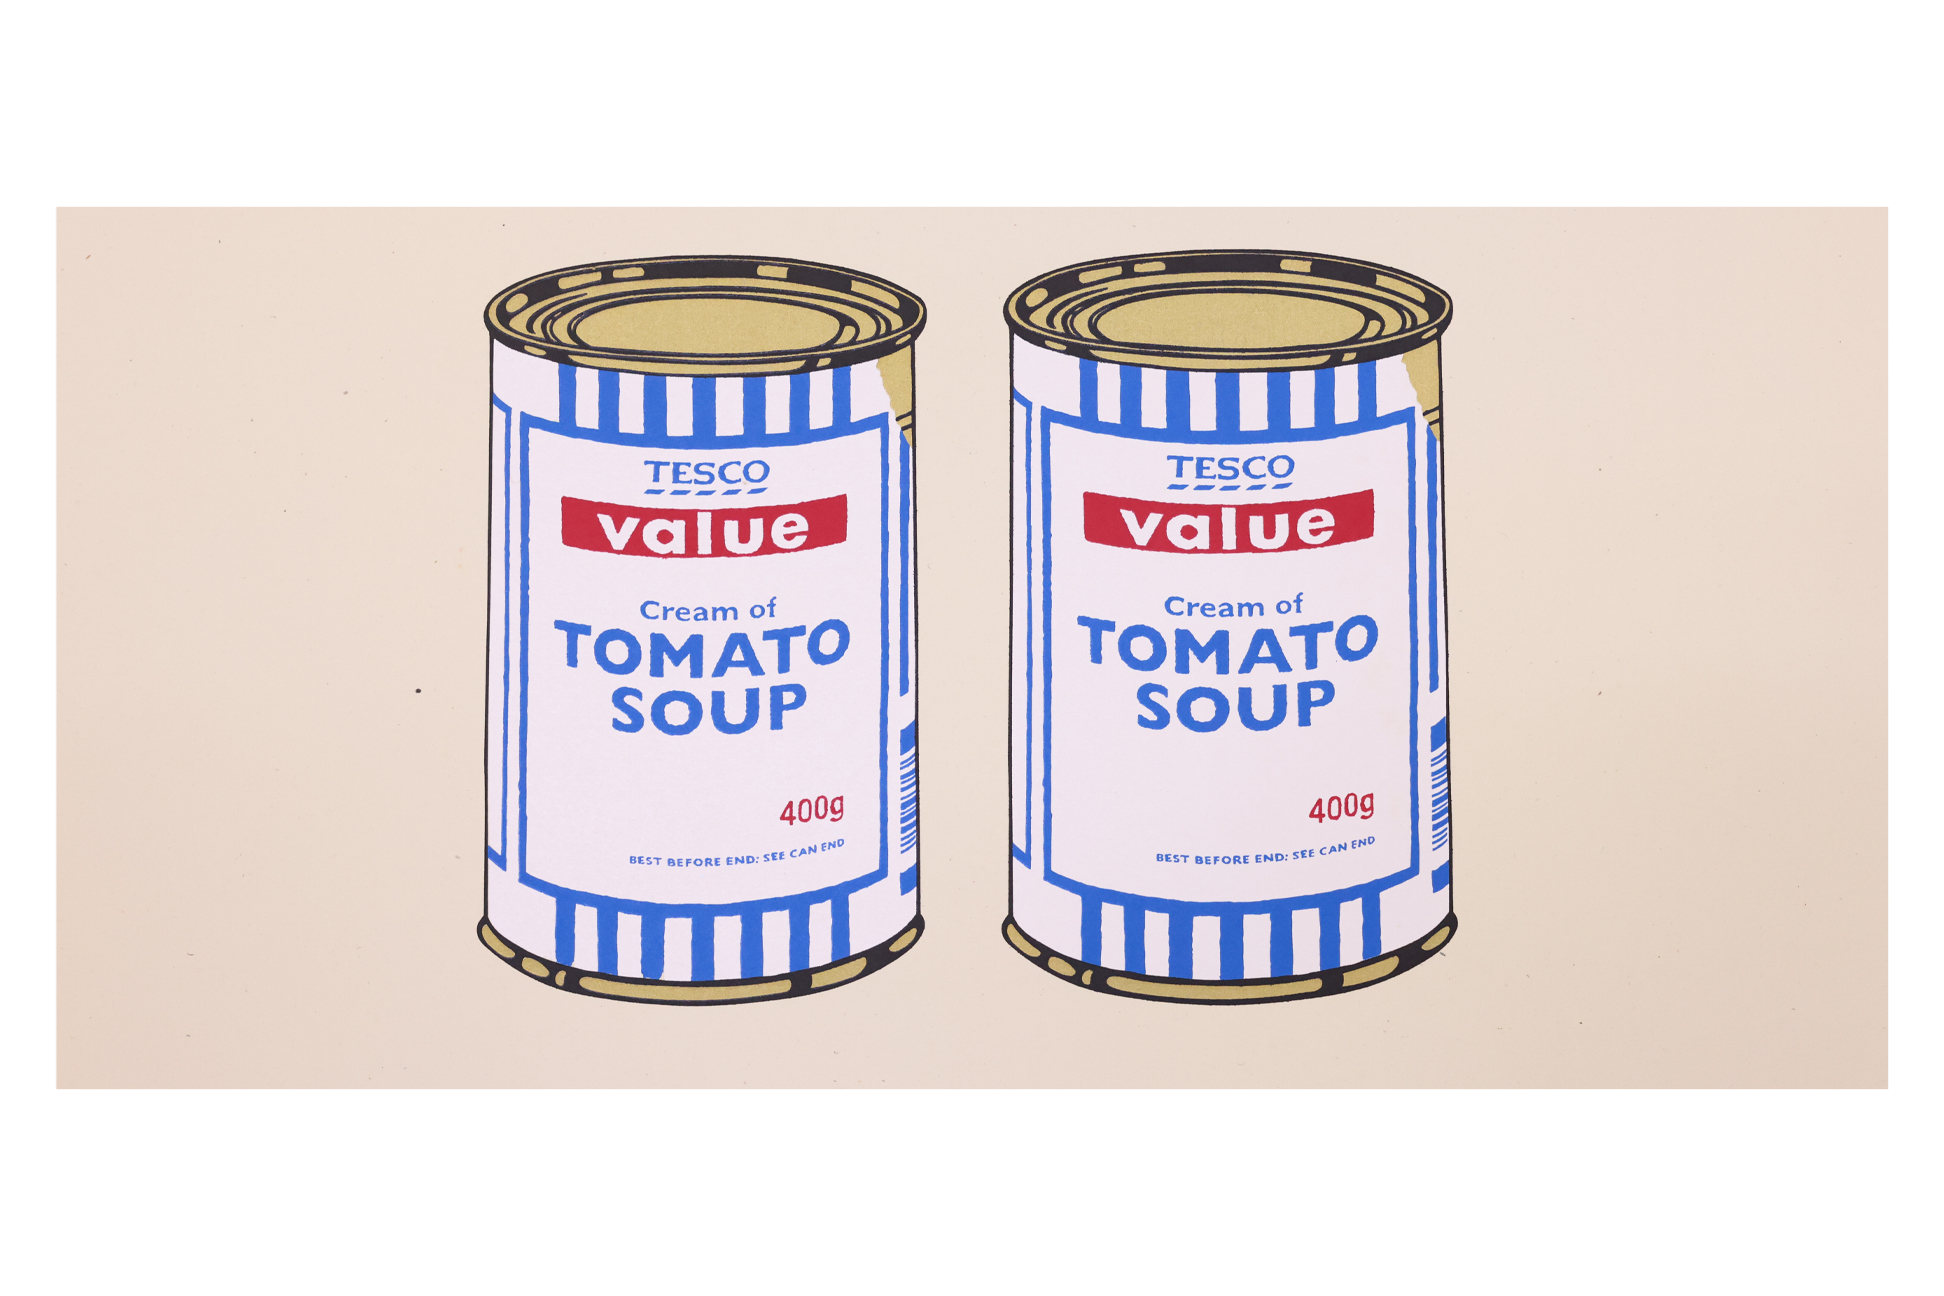 BANKSY (B.1974) - 'FOUR SOUP CANS - GOLD ON CREAM' 2006 - Image 4 of 4